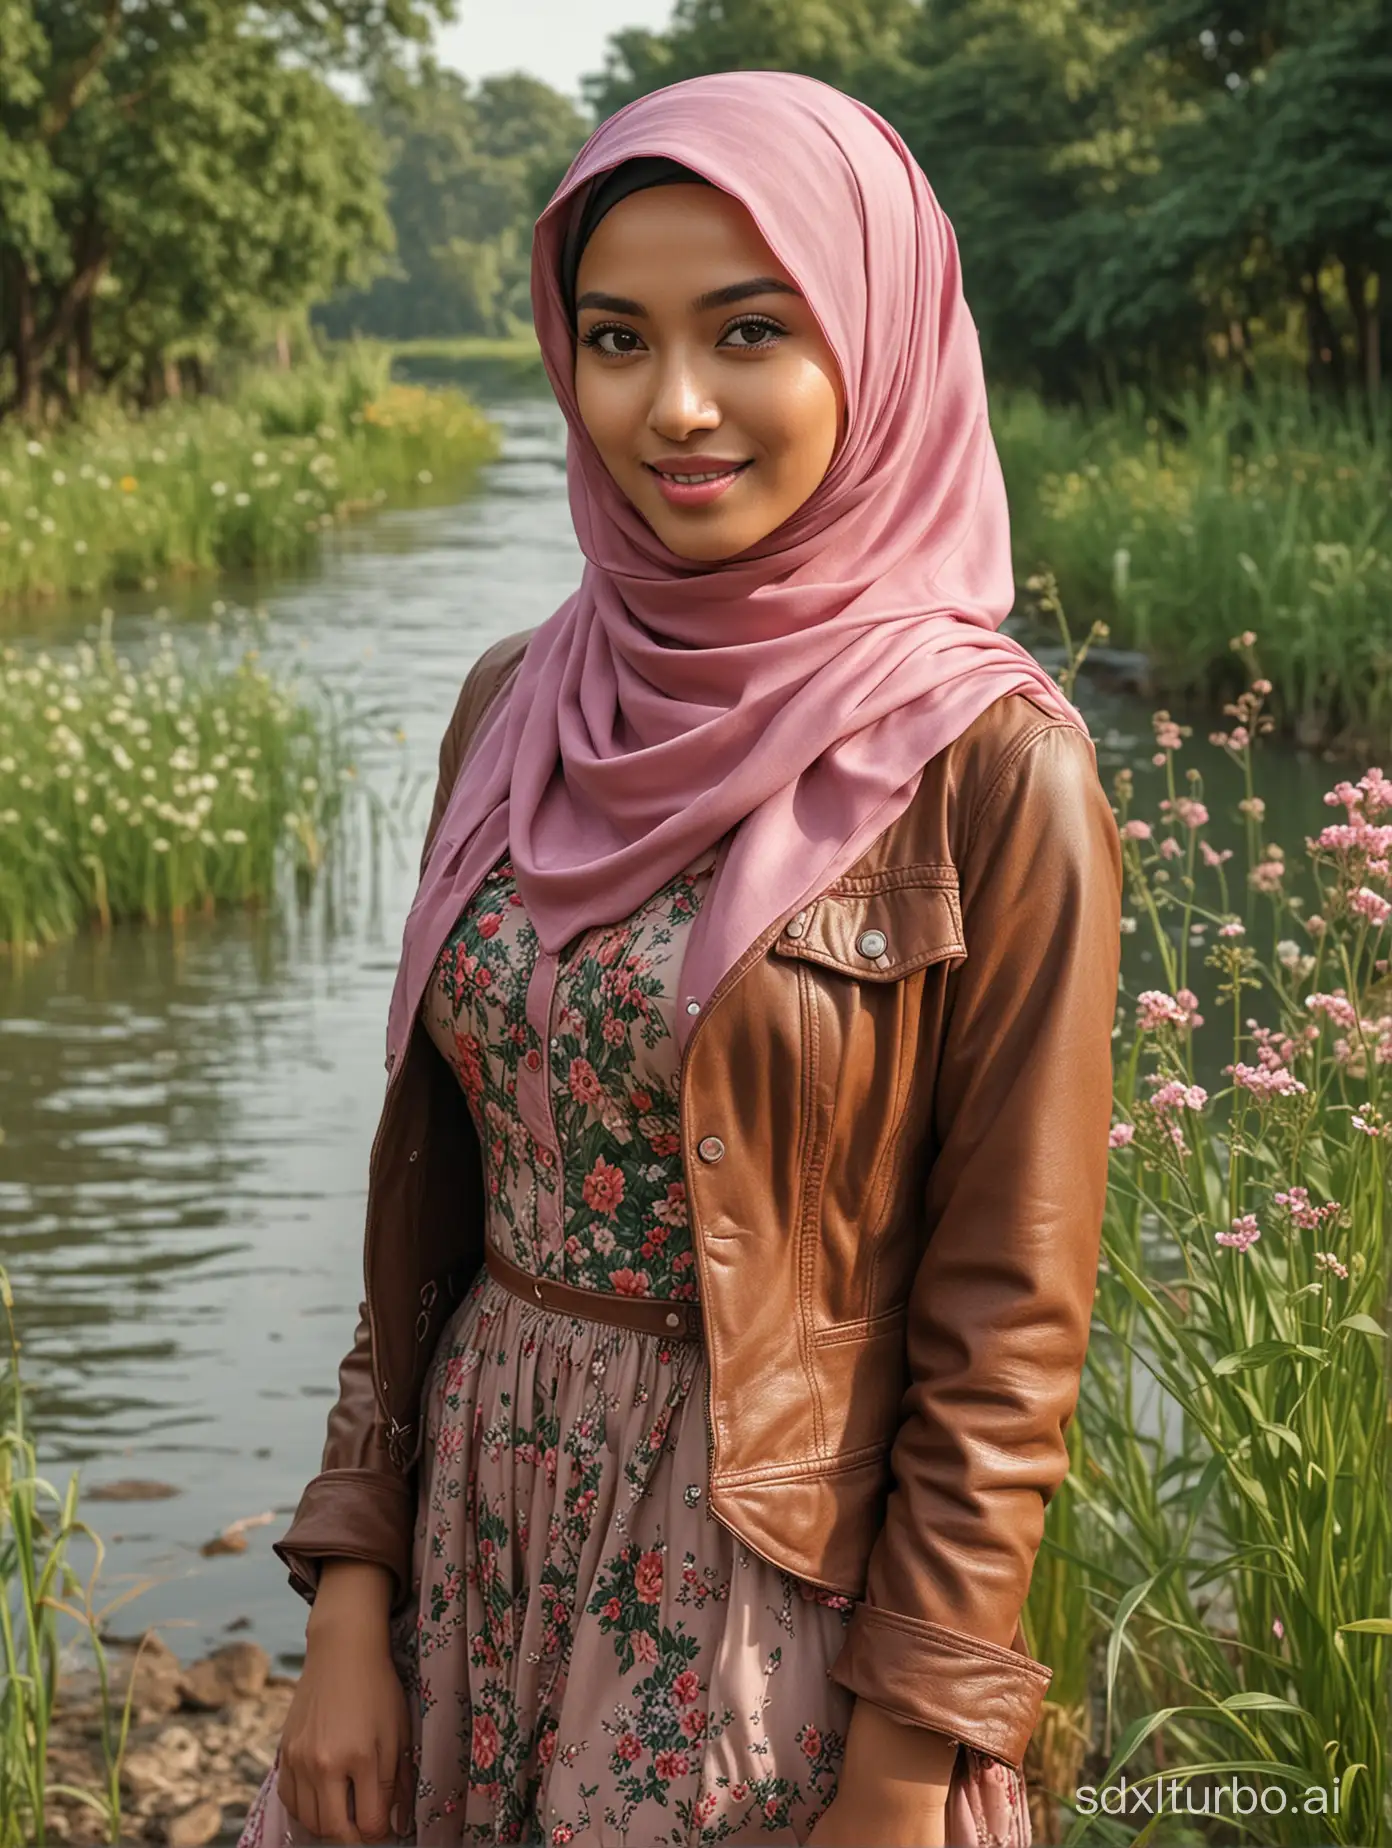 masterpiece, best quality, highly detailed face and skin, realistic photo, expressive eyes, perfect face, detailed eyes, detailed lips, beautiful face smile, a woman from Indonesia, wearing a stylish light brown hijab, wearing a light brown leather jacket, long skirt with the same color as the hijab, standing on the river bank, background of green grass and trees with bright pink flowers, back pose, high quality, hyperrealistic, cool ambient, highly detailed, realistic, photography, ultra HD, ultra quality, aesthetic, bright photo quality, full body